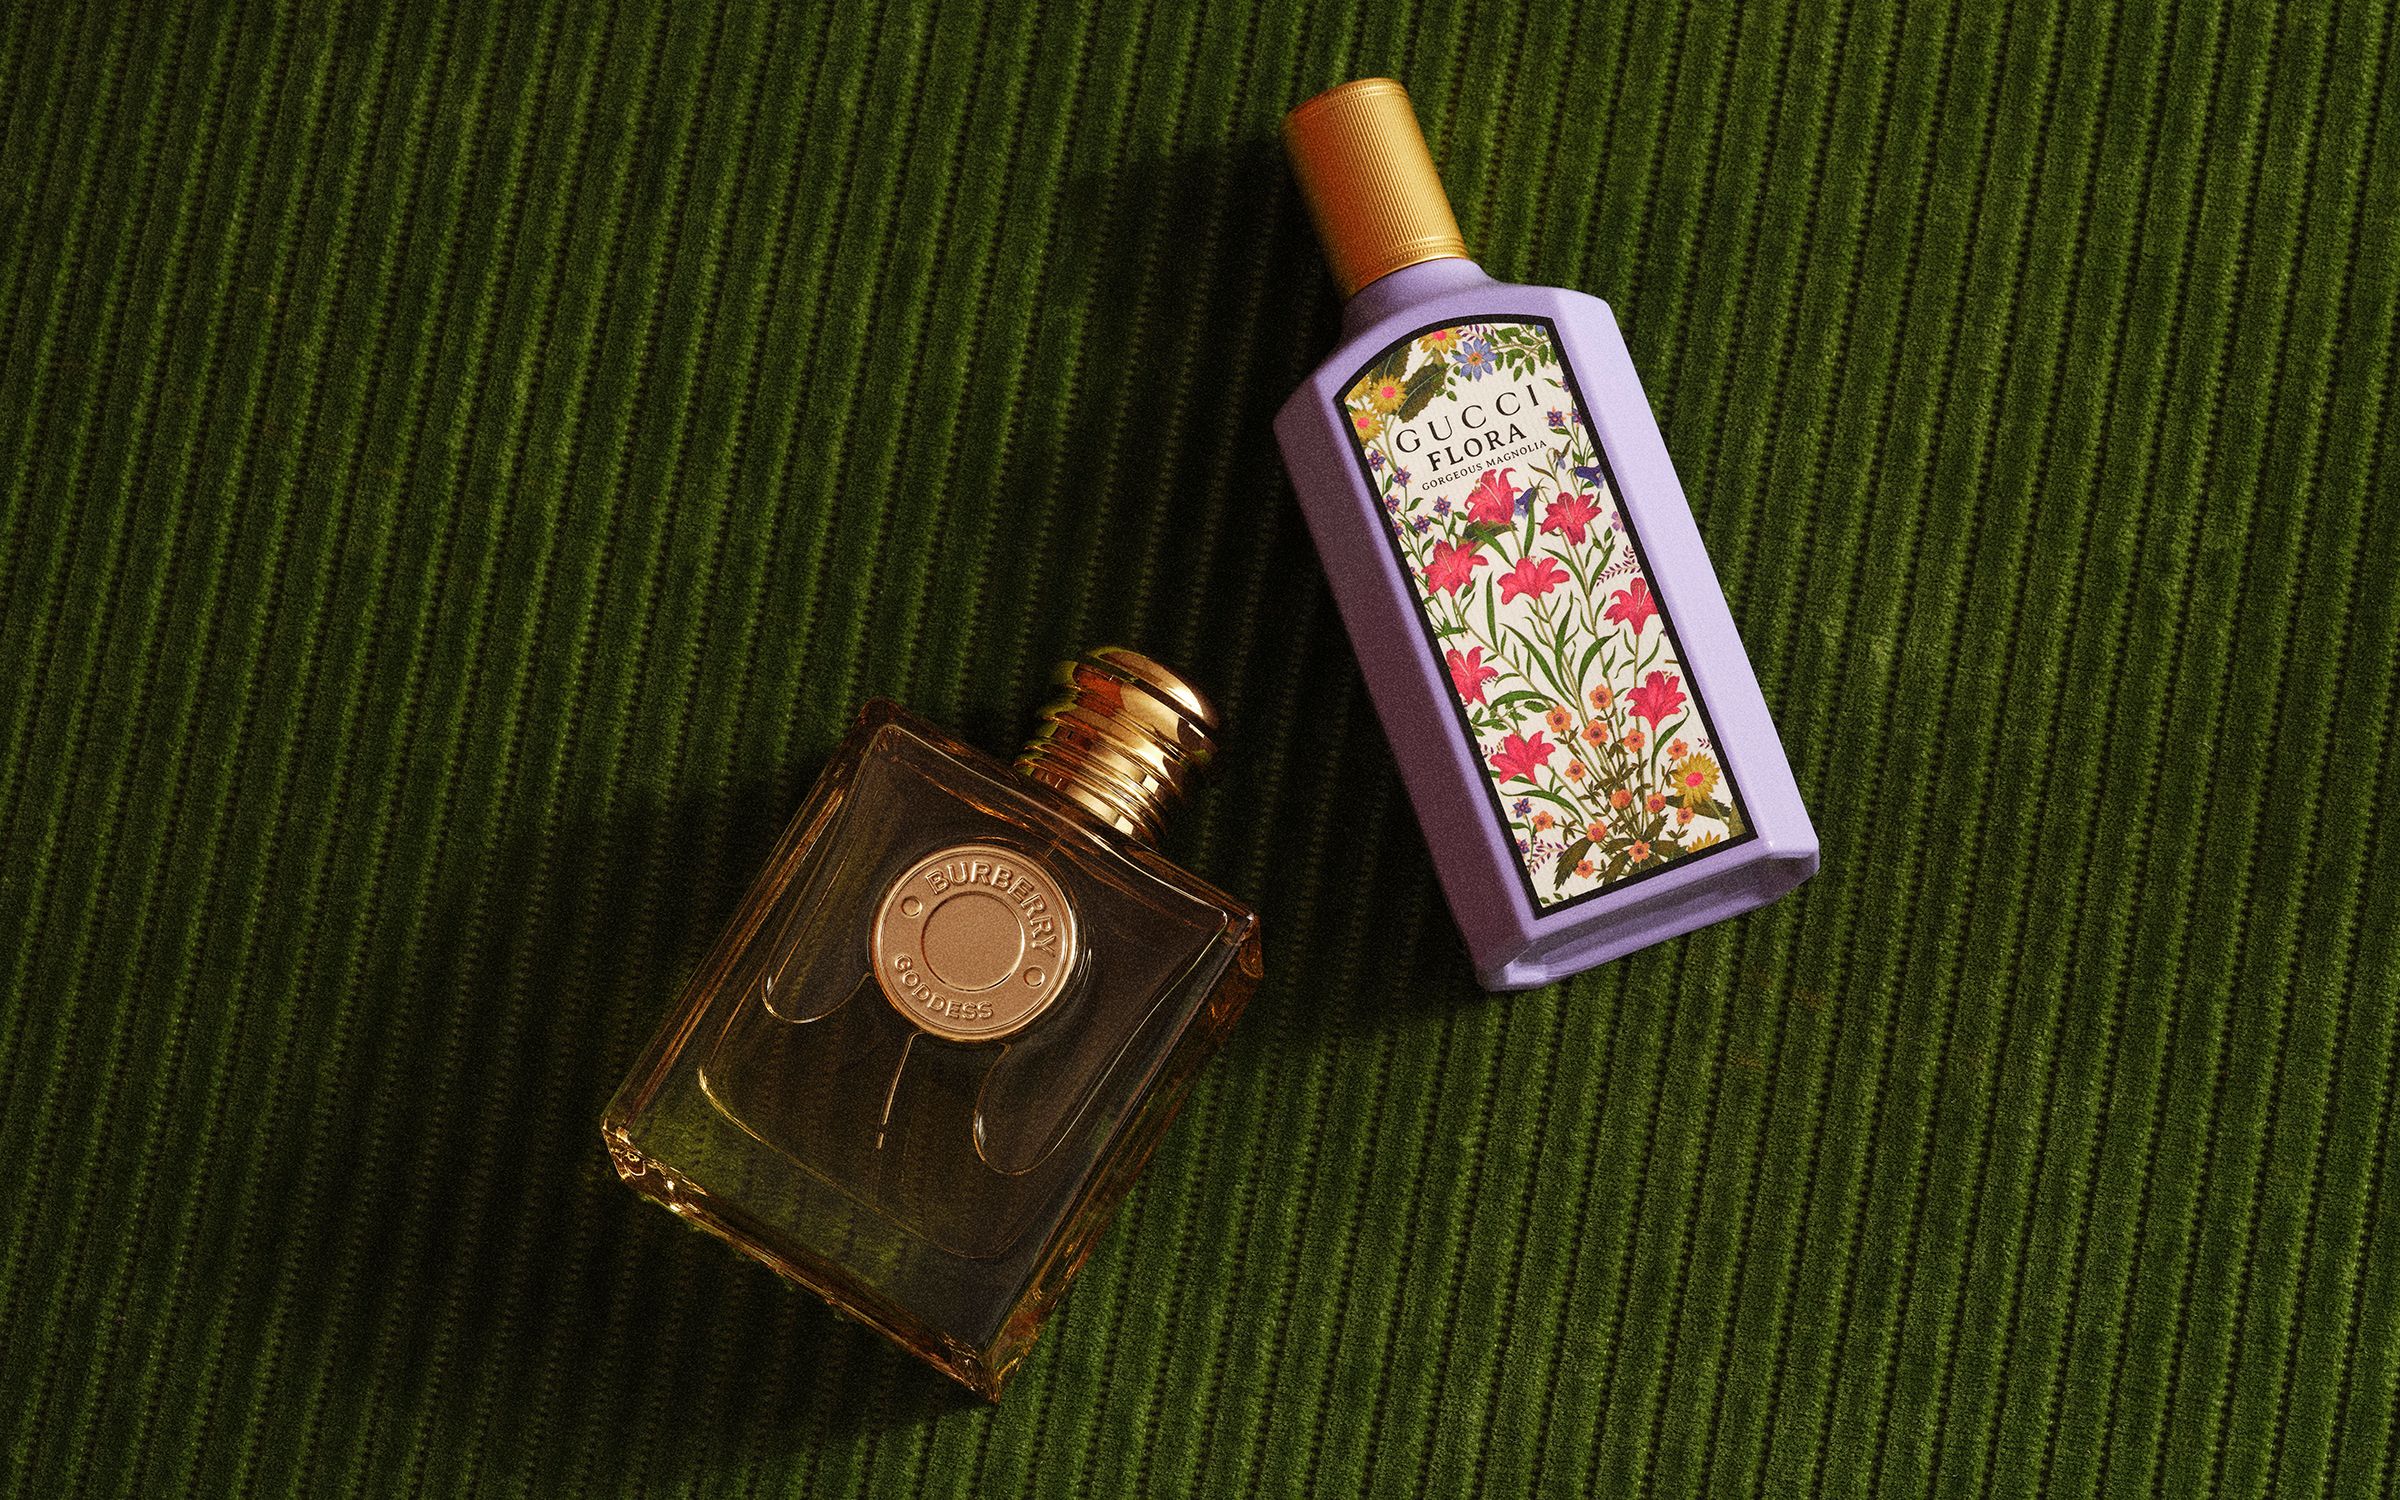 Perfumes - Gucci Flora and Burberry Goddess